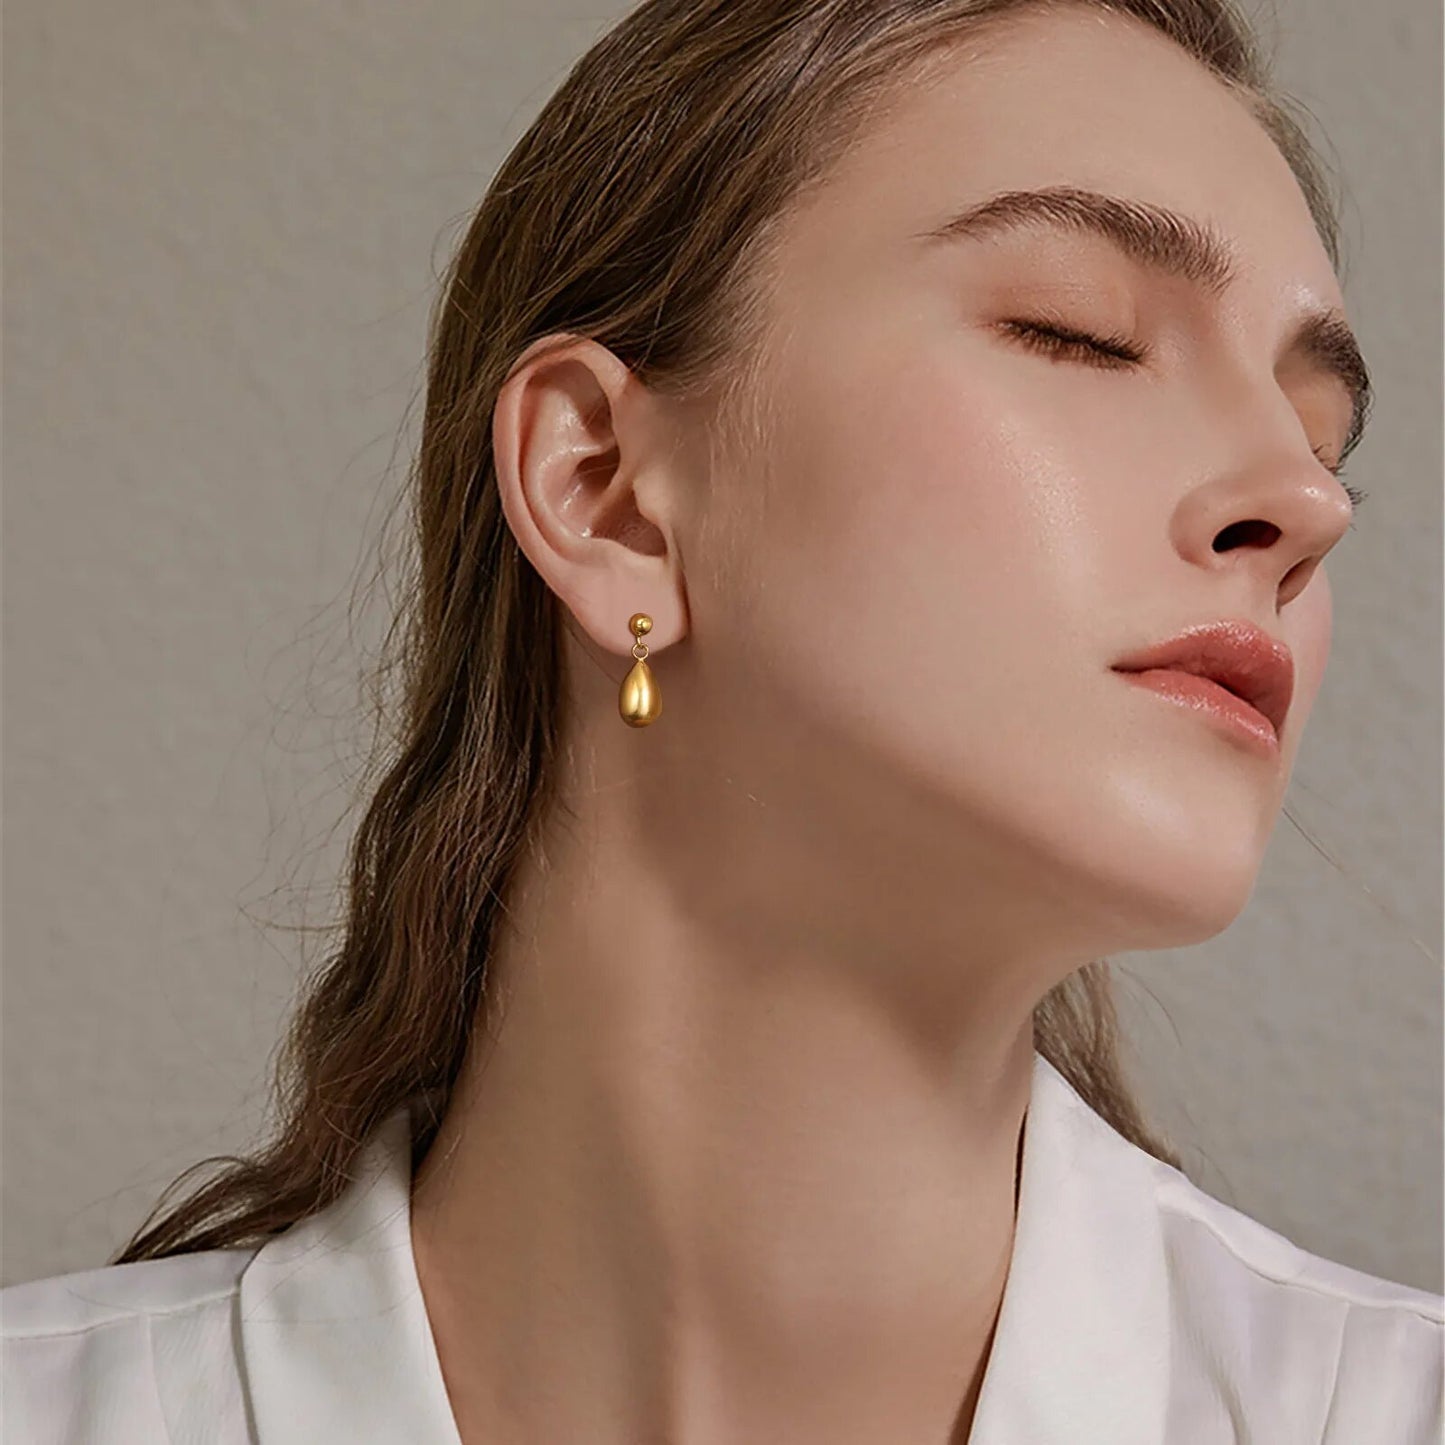 Women's Earrings Aretes para mujeres Chic Water Drop Earrings for Women, Anti Allergy Gold Color Stainless Steel Earring, Her Birthday Party Gift Jewelry